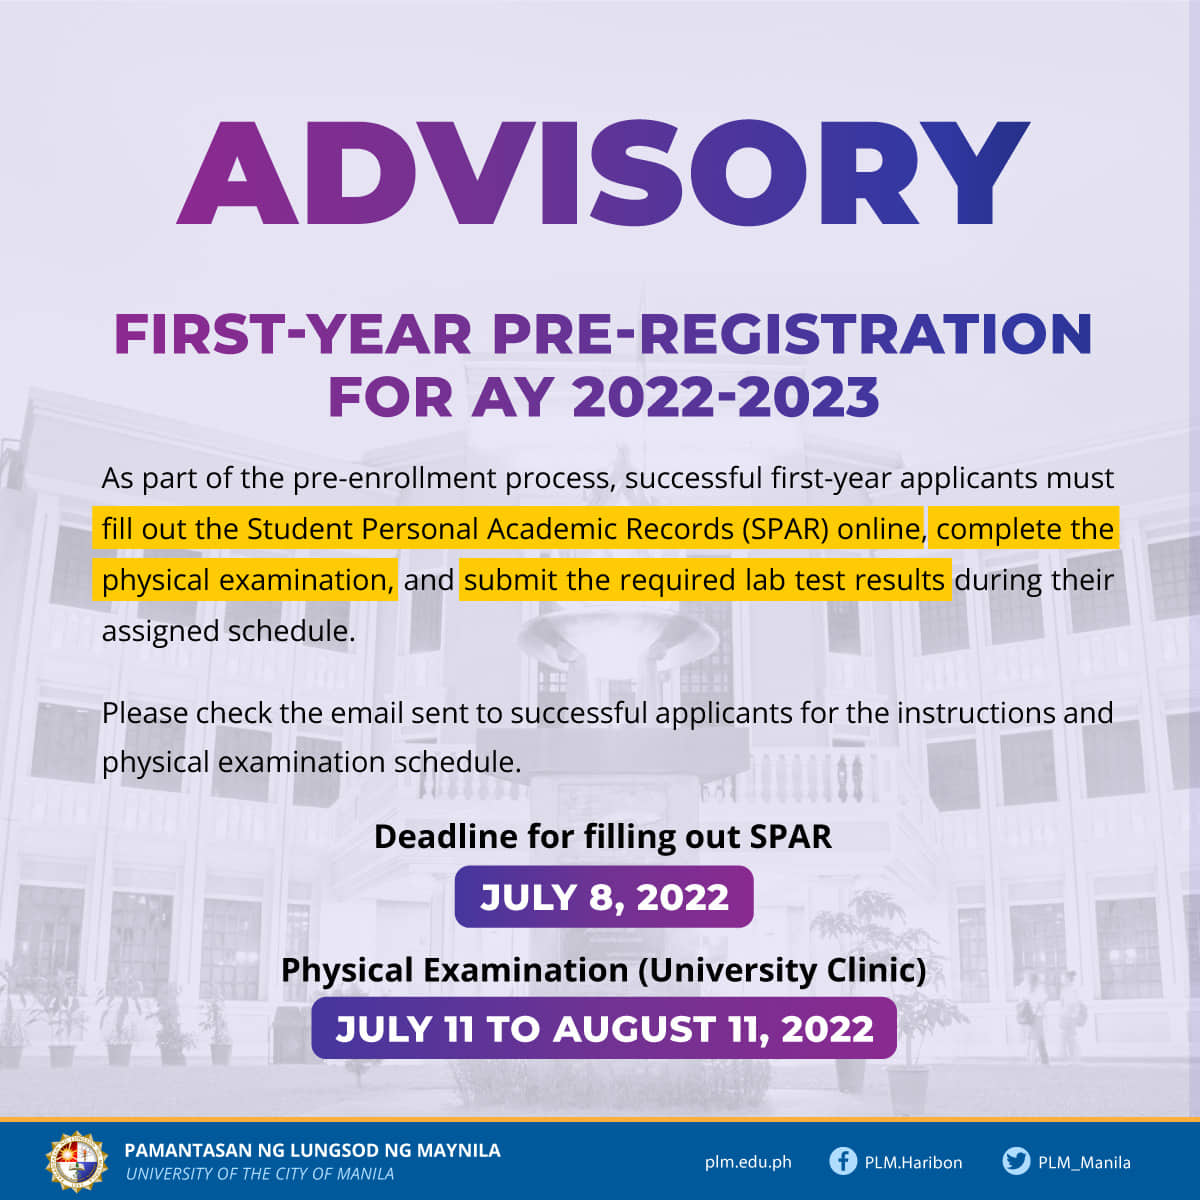 First year pre-registration for AY 2022-2023